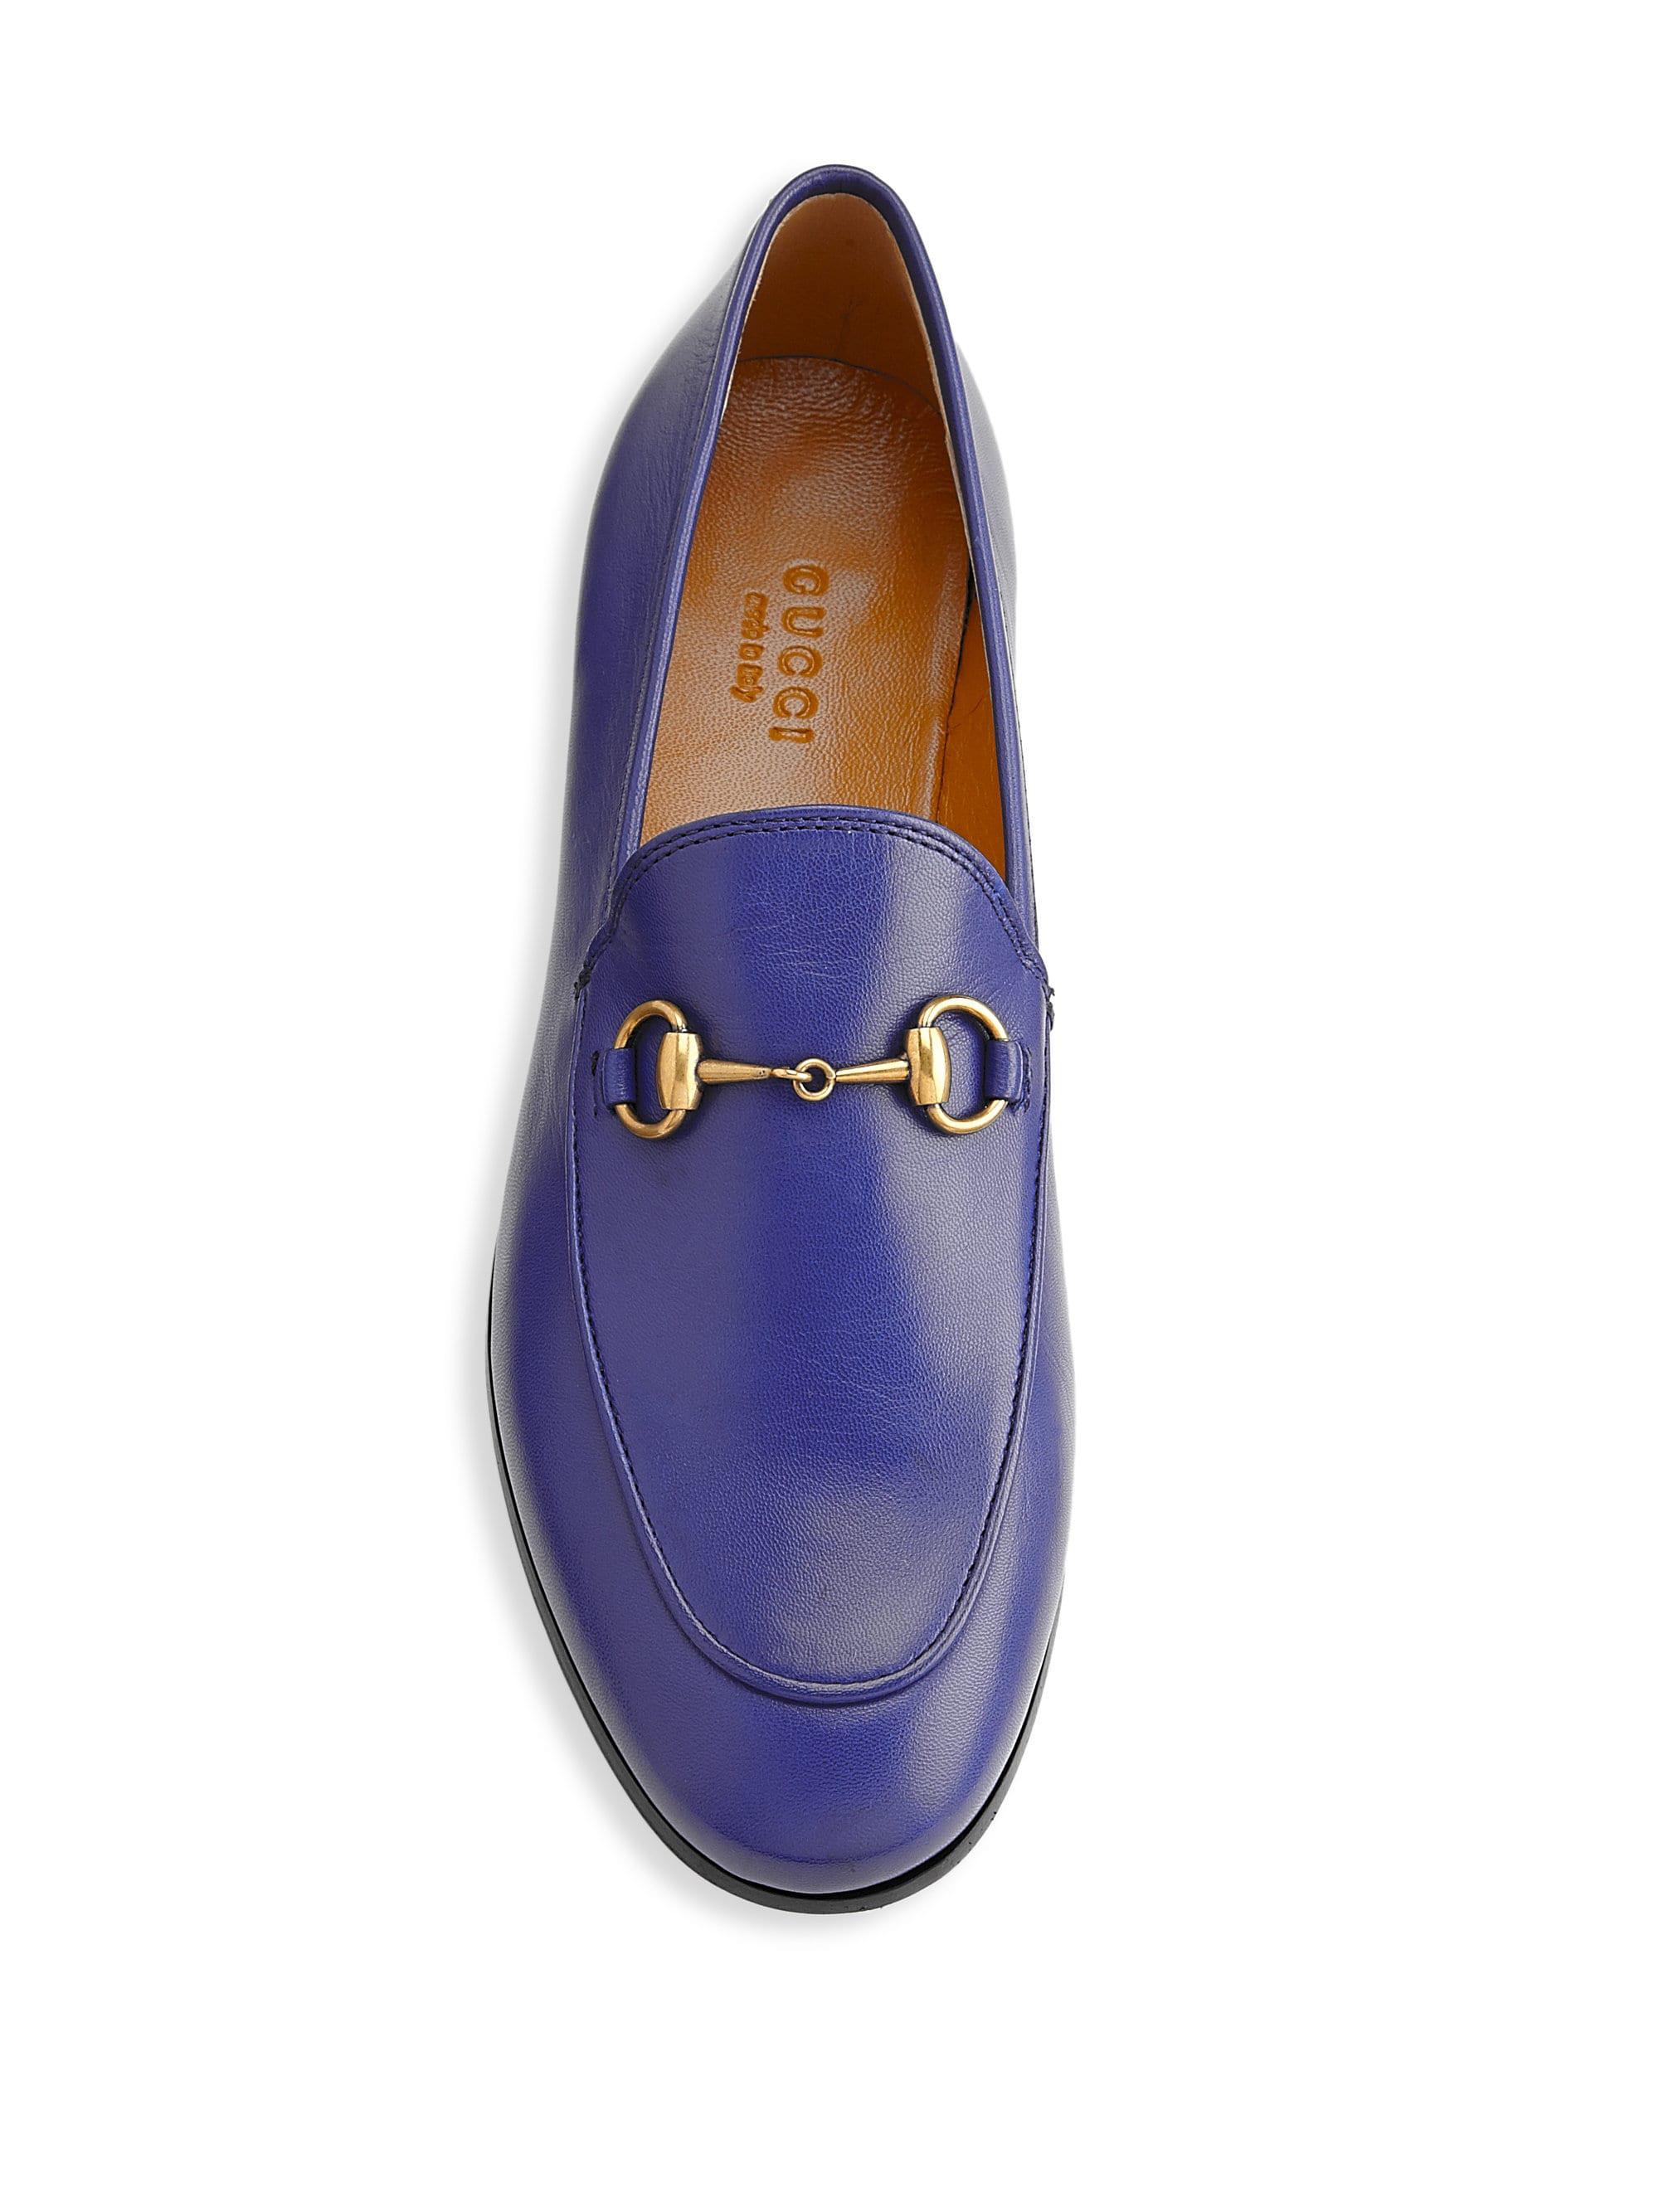 Gucci Jordaan Leather Loafers in Blue Sapphire (Blue) - Lyst